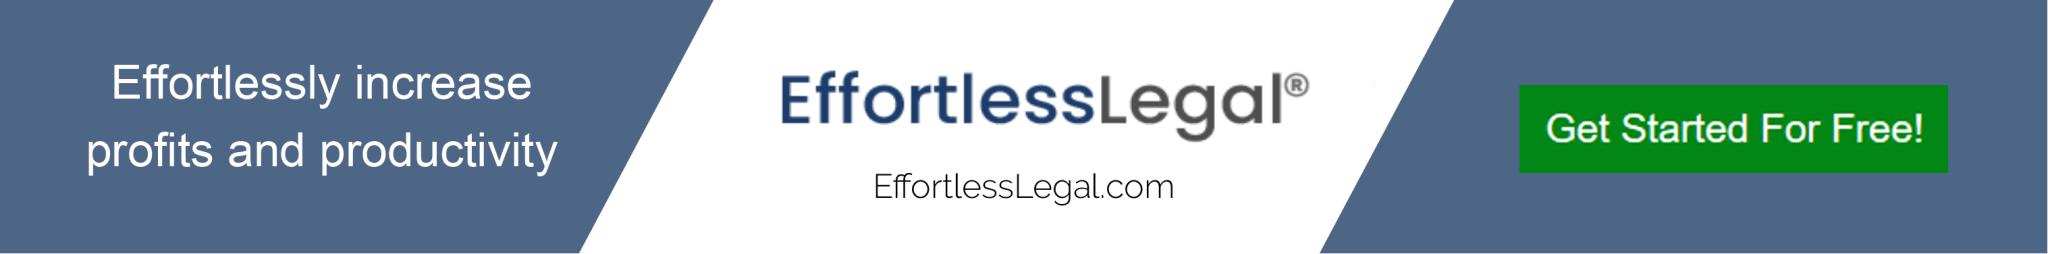 Law Firm Automation, Legal Billing Software and More - EffortlessLegal